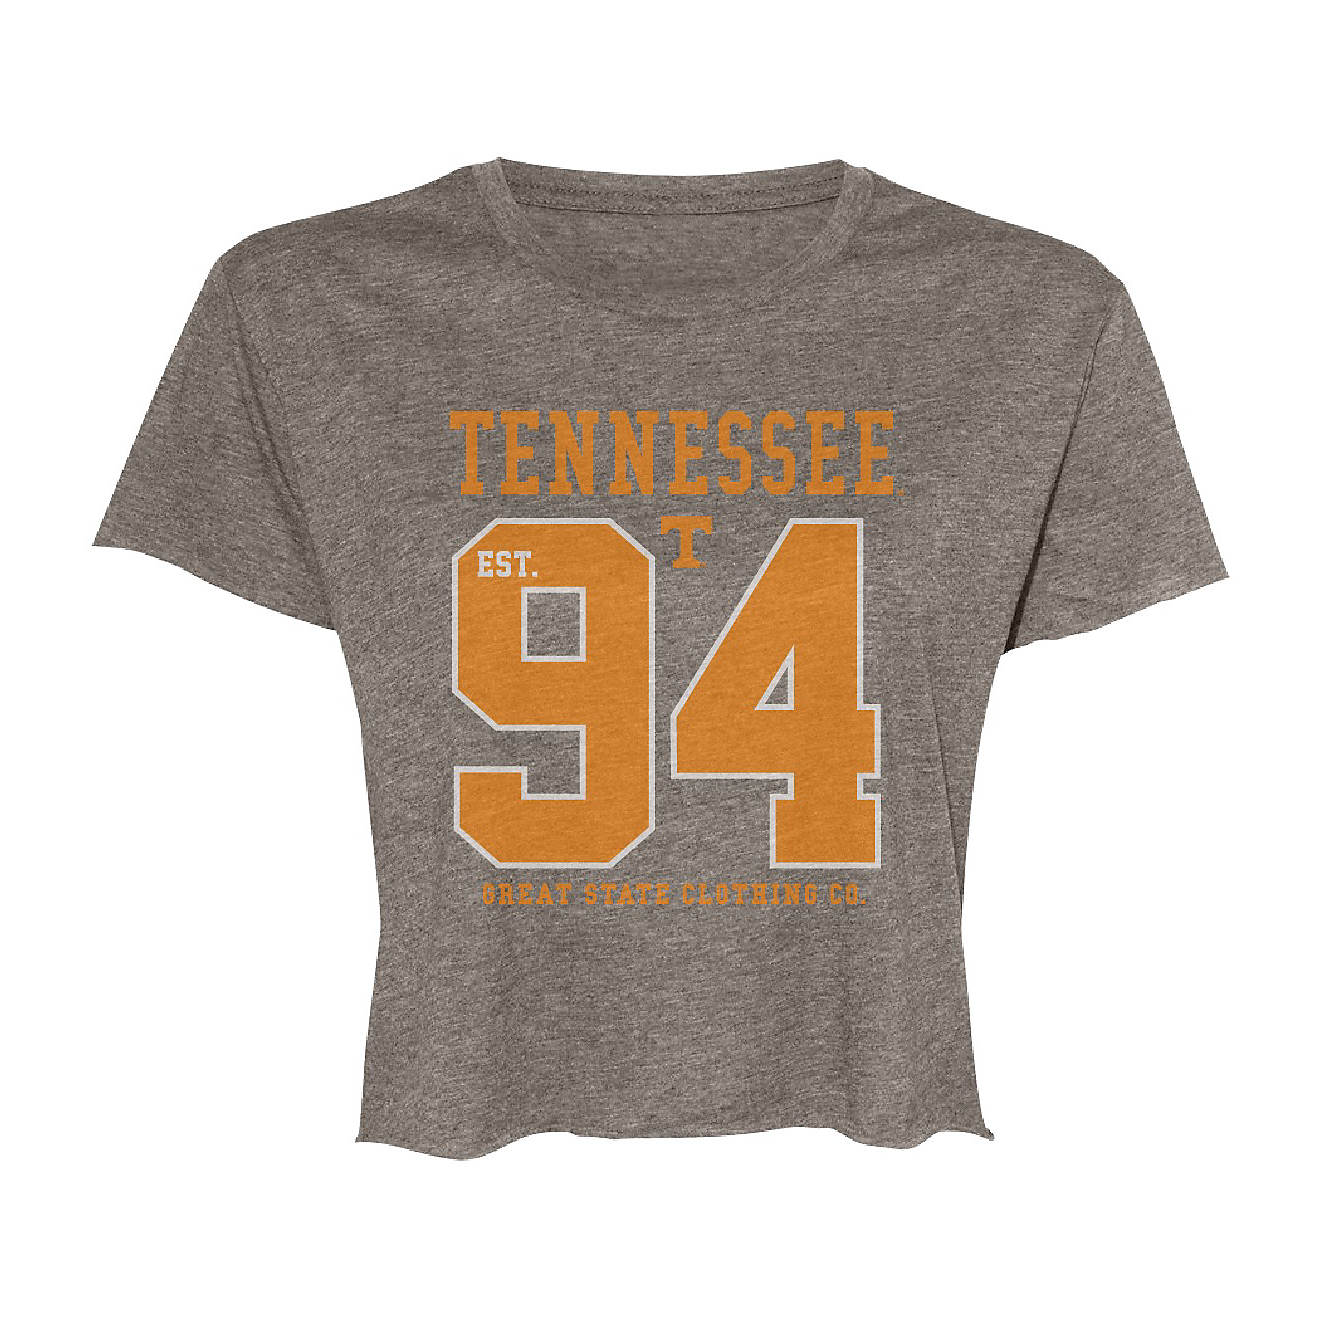 Great State Women's University of Tennessee Vintage Jersey Crop Top T-shirt                                                      - view number 1